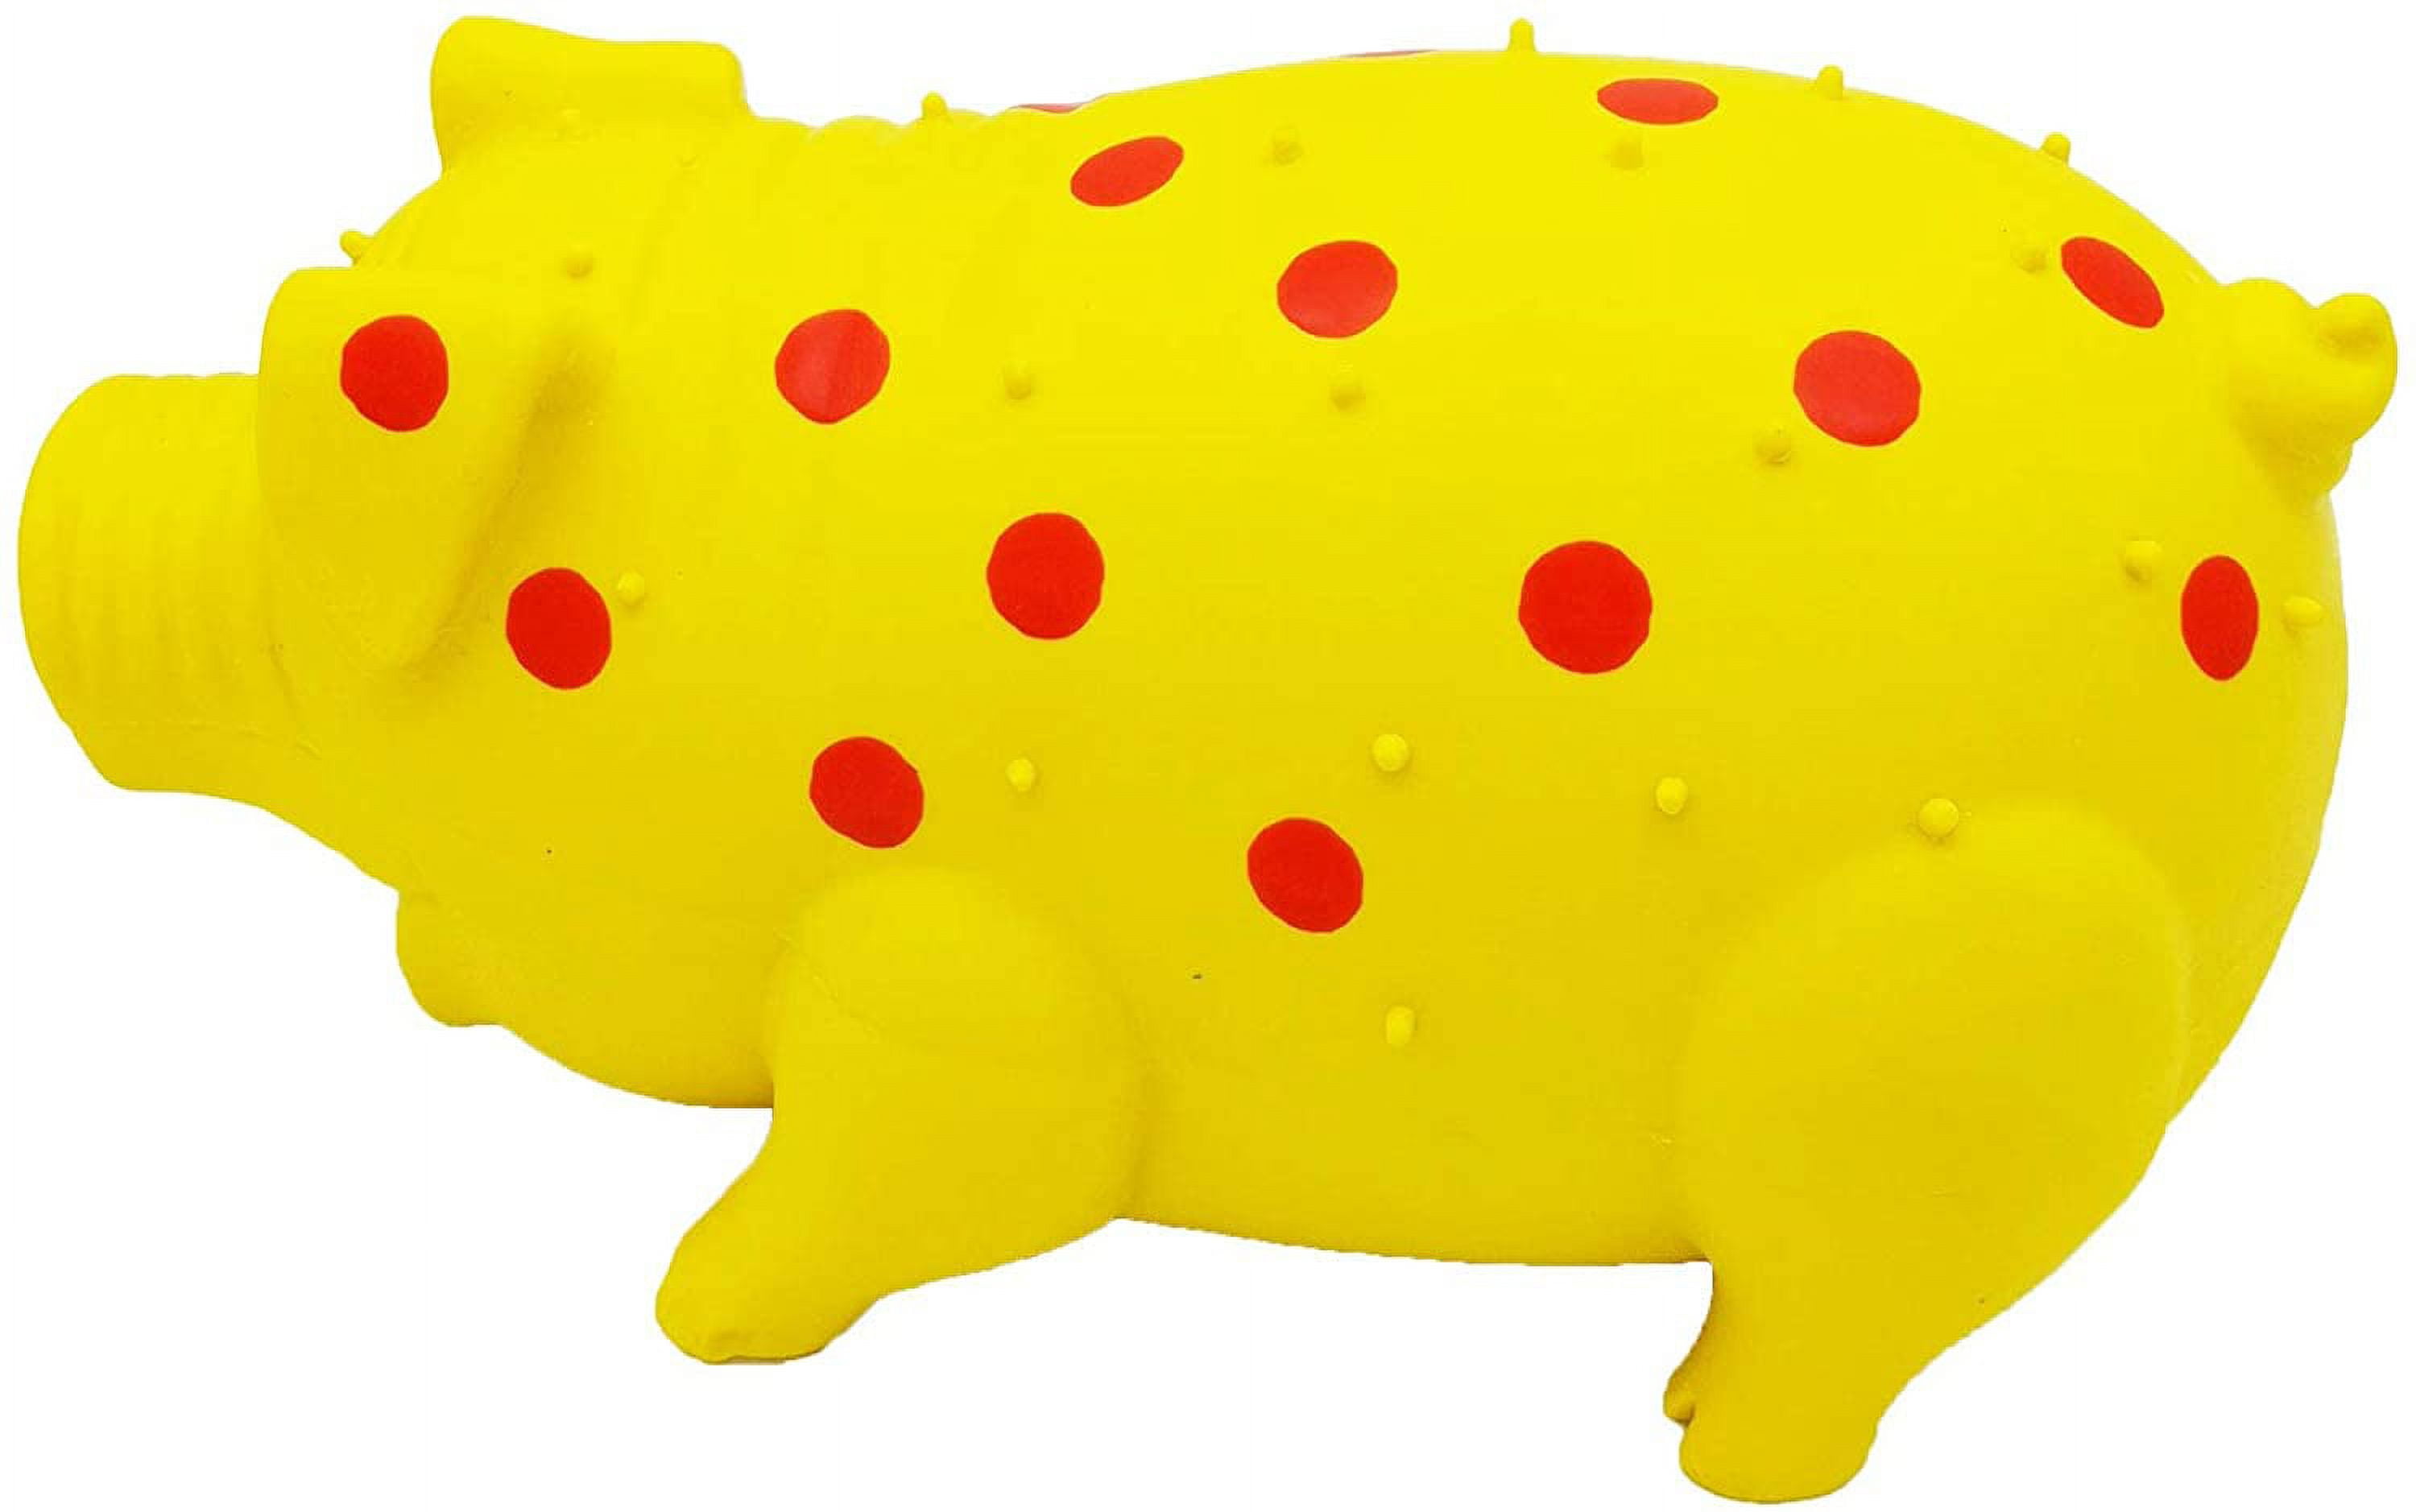 Dog Squeaky Toy, Dots Latex Dog Chew Toys With A Oinks Sound Squeaker  Grunting Pig Dog Toy Durable Self Play 8 Dog Squeeze Toy For Dental Biting  Chas